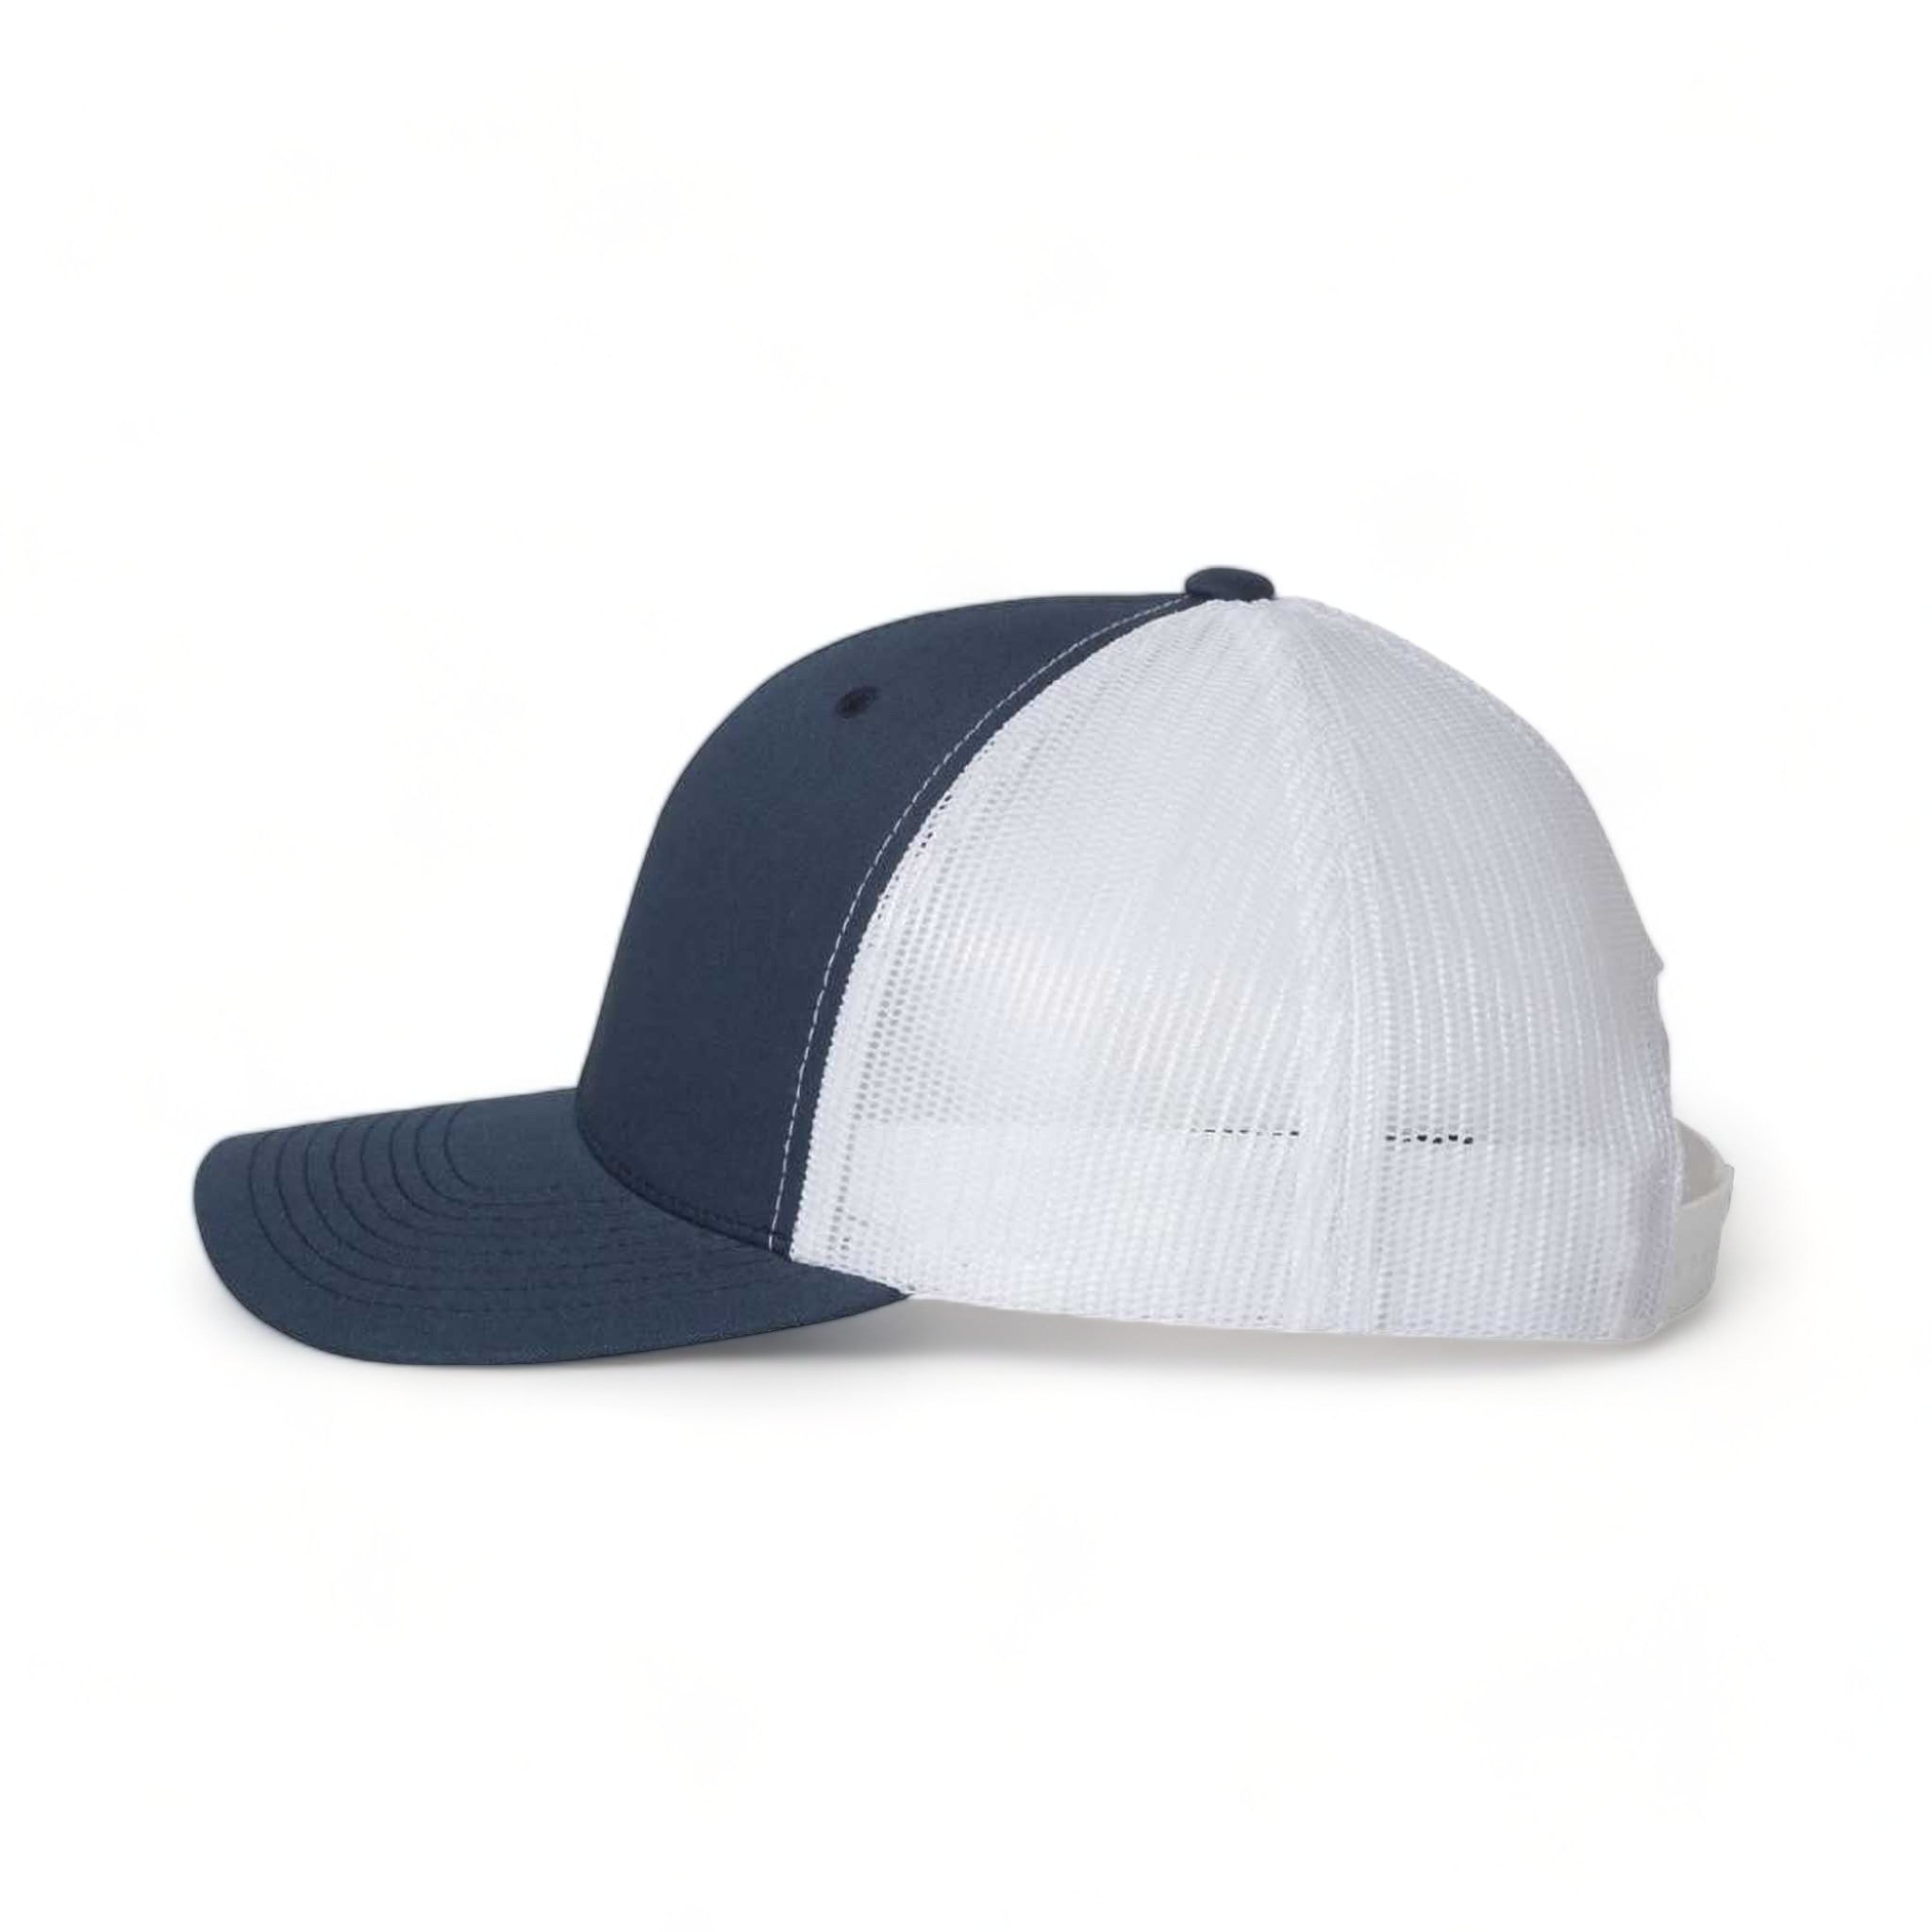 Side view of YP Classics 6606 custom hat in navy and white